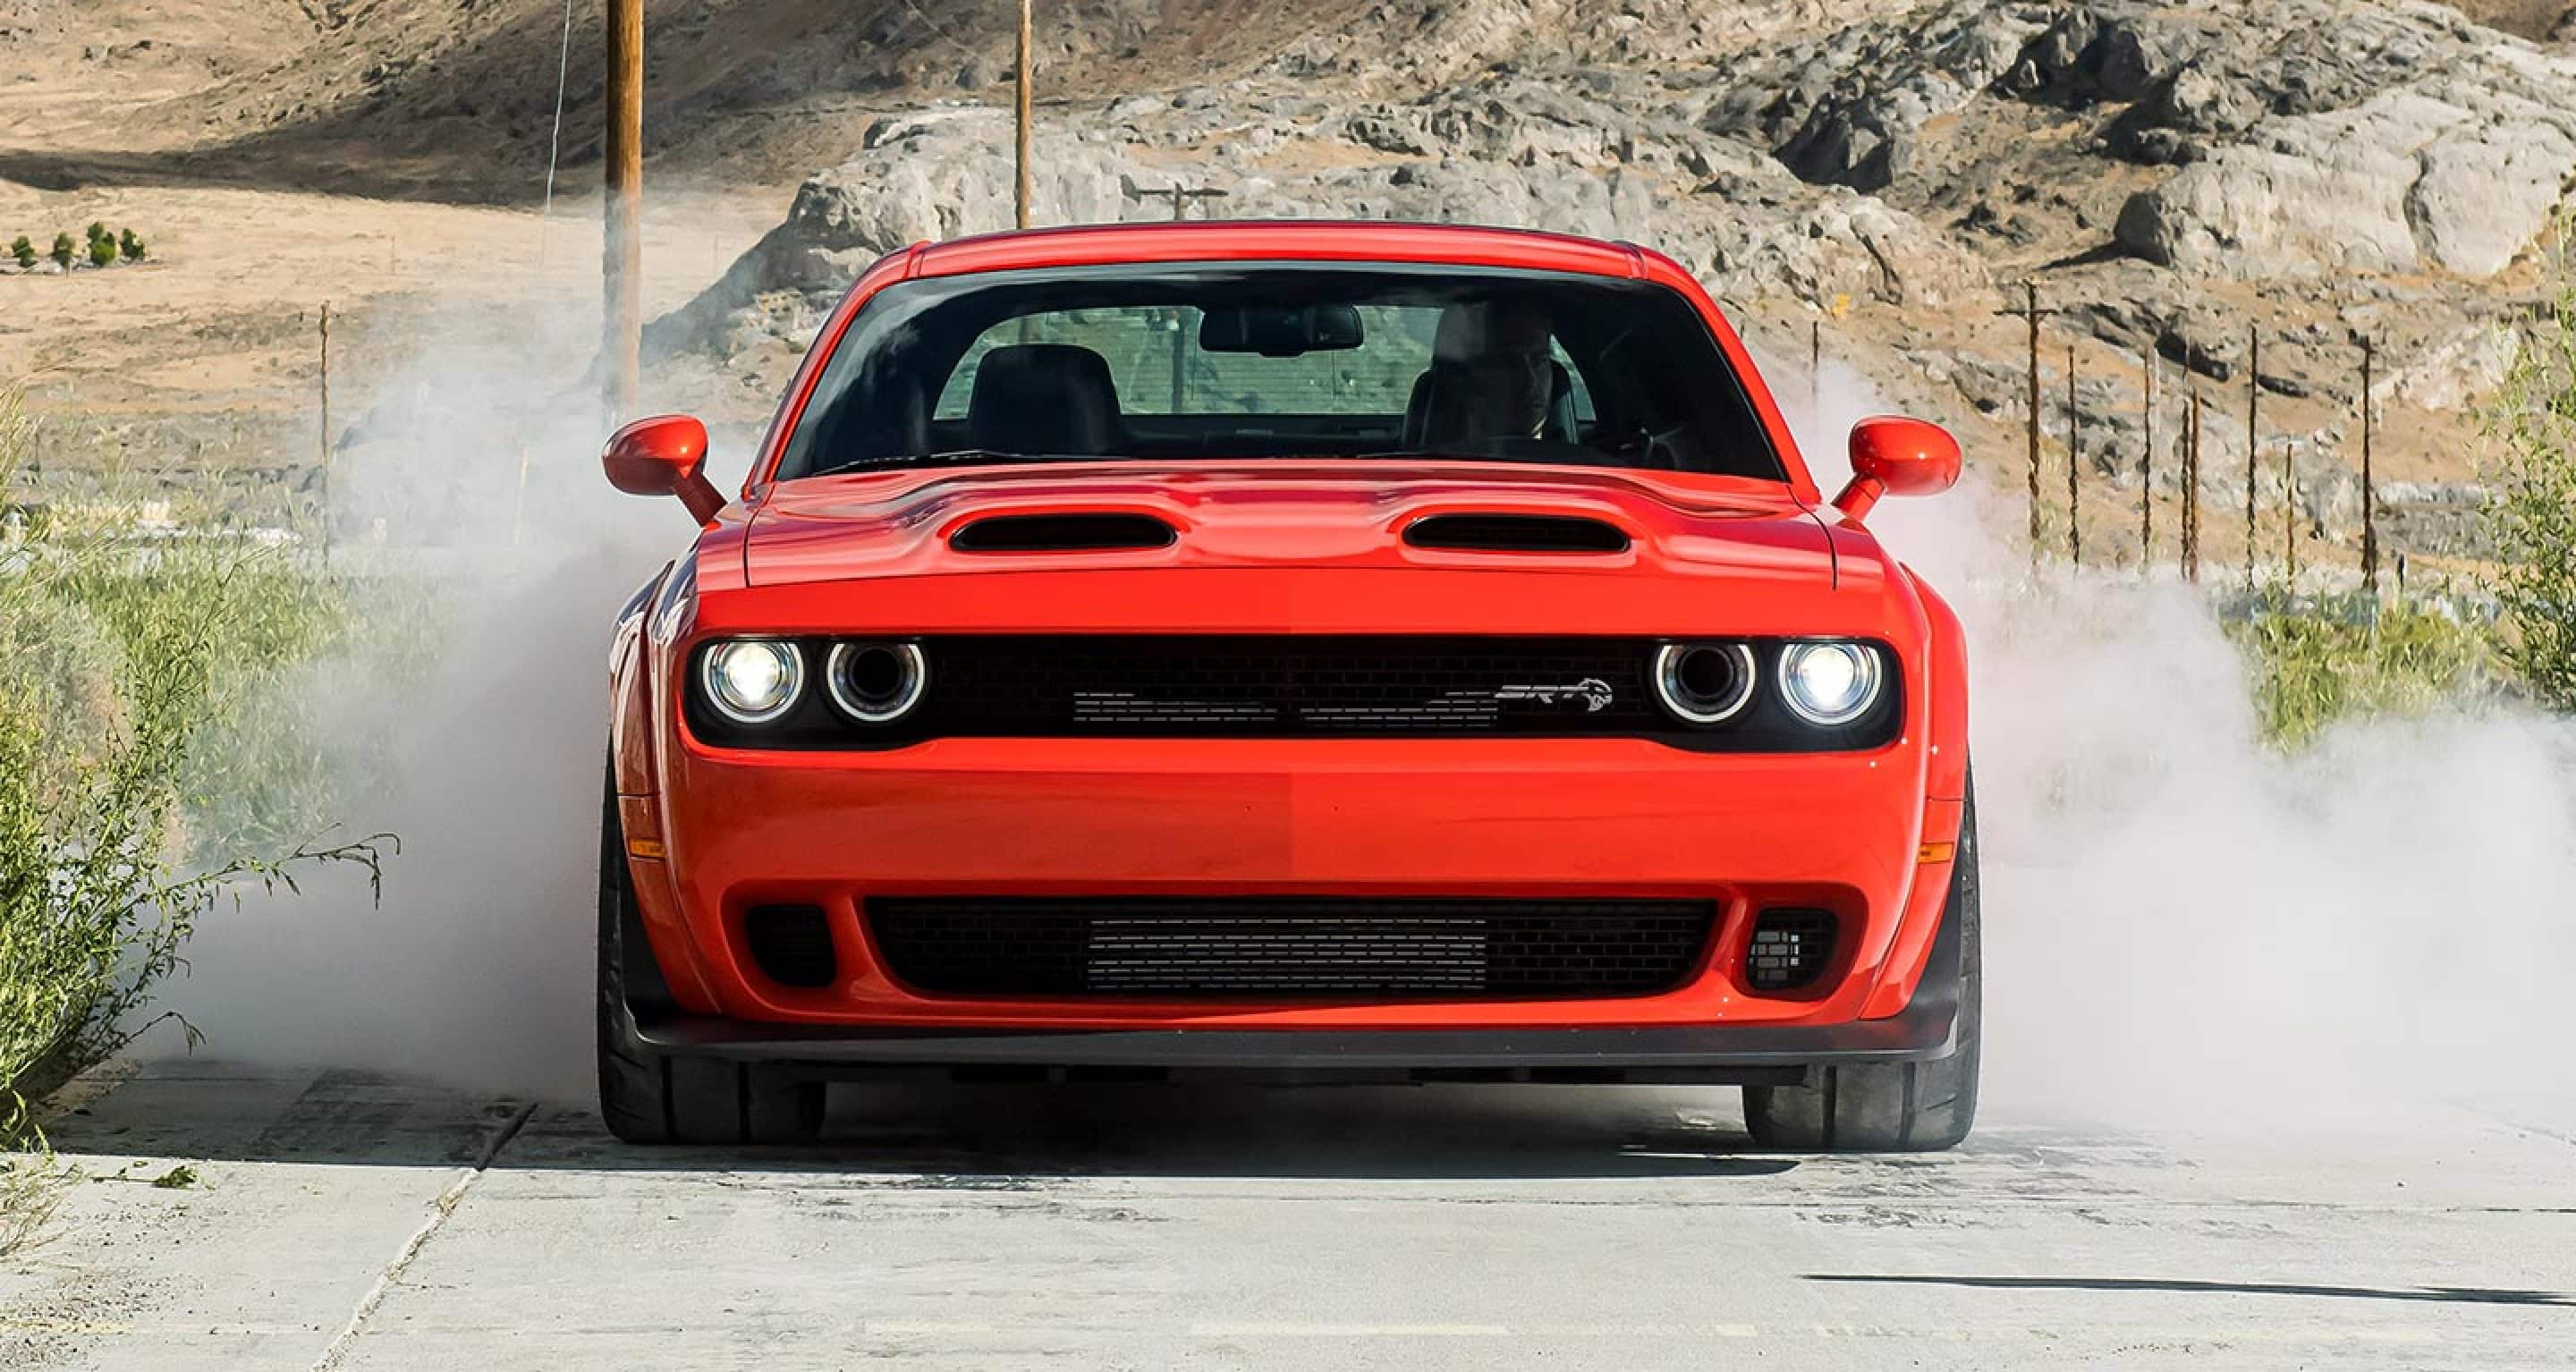 Trim Levels of the 2021 Dodge Challenger